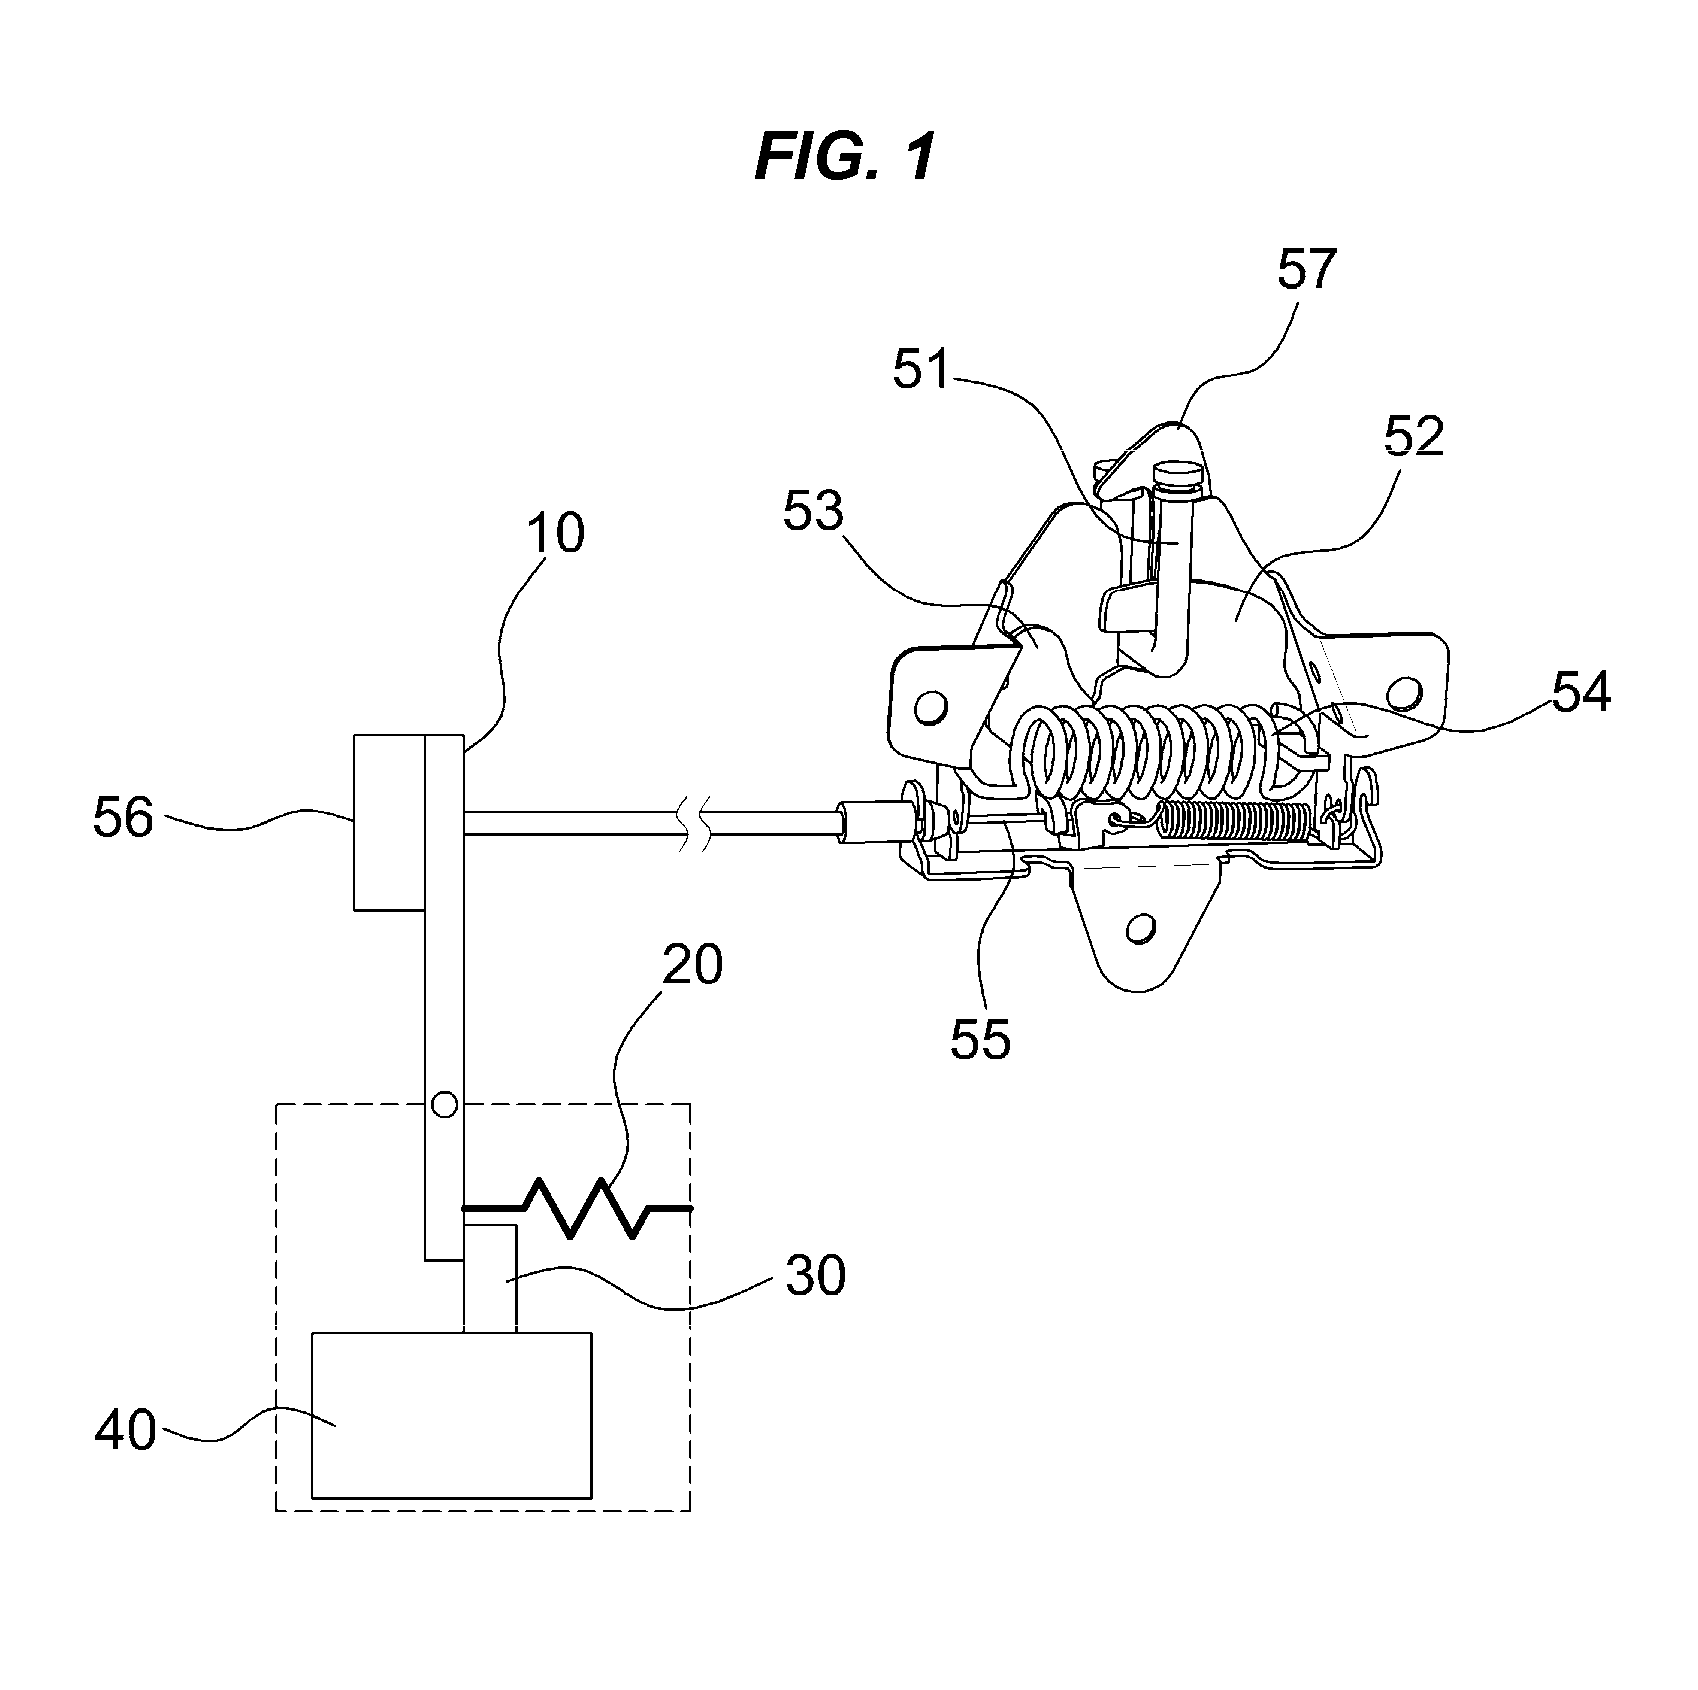 Active hood latch system for vehicle